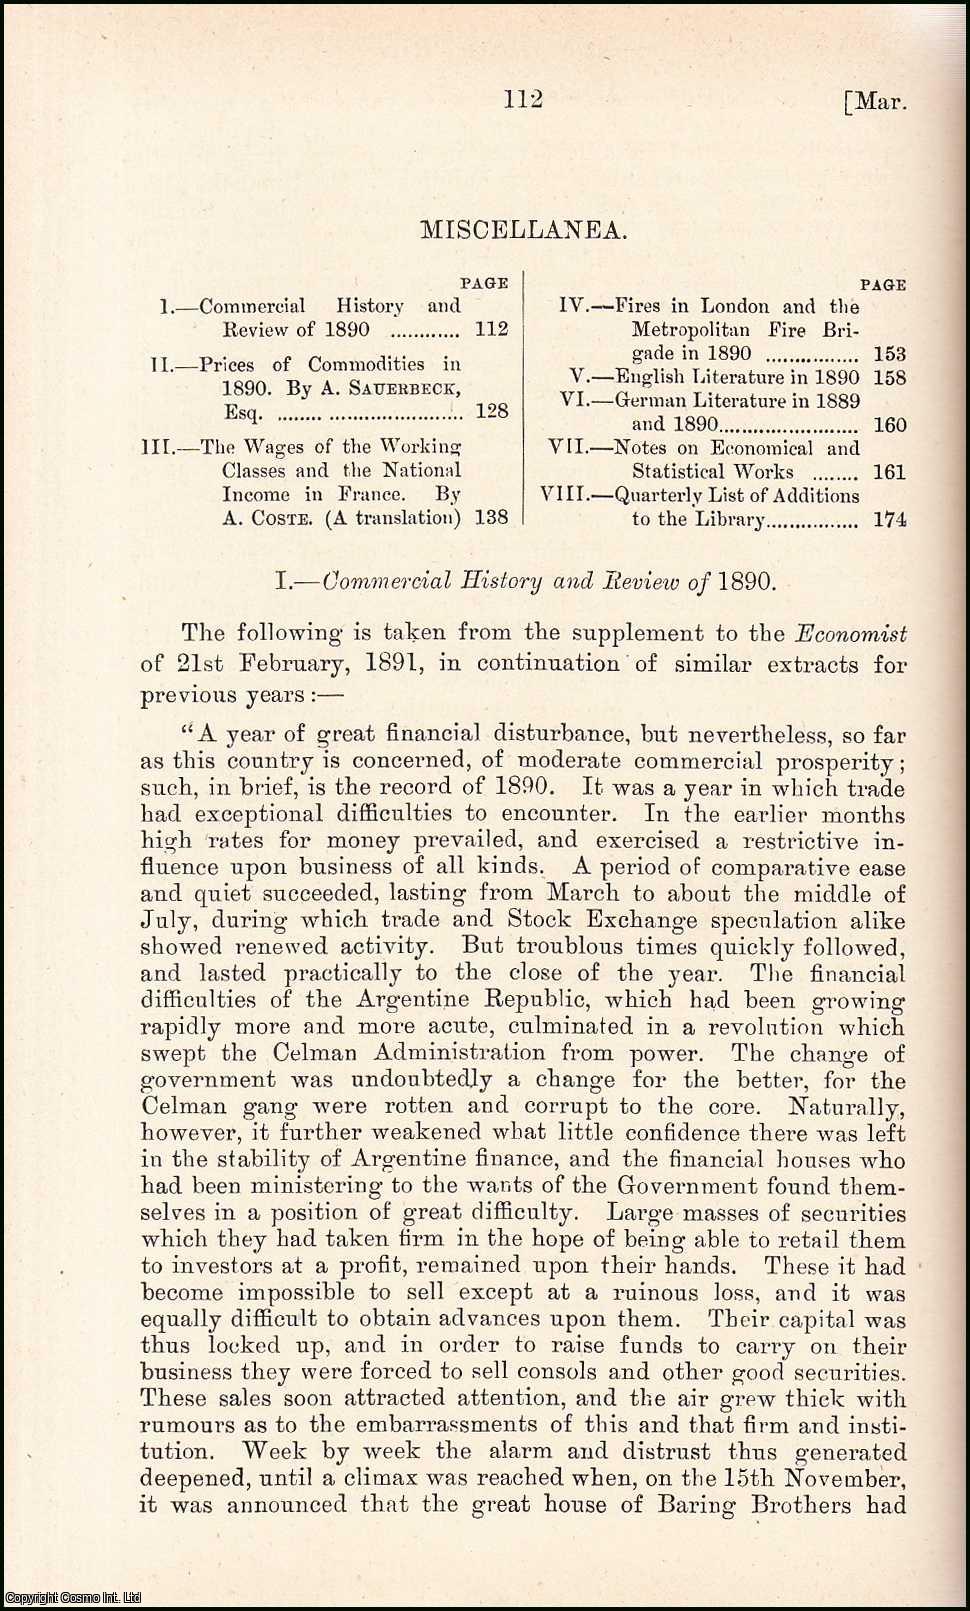 No Author Stated - Commercial History & Review of 1890. An uncommon original article from the Journal of the Royal Statistical Society of London, 1891.